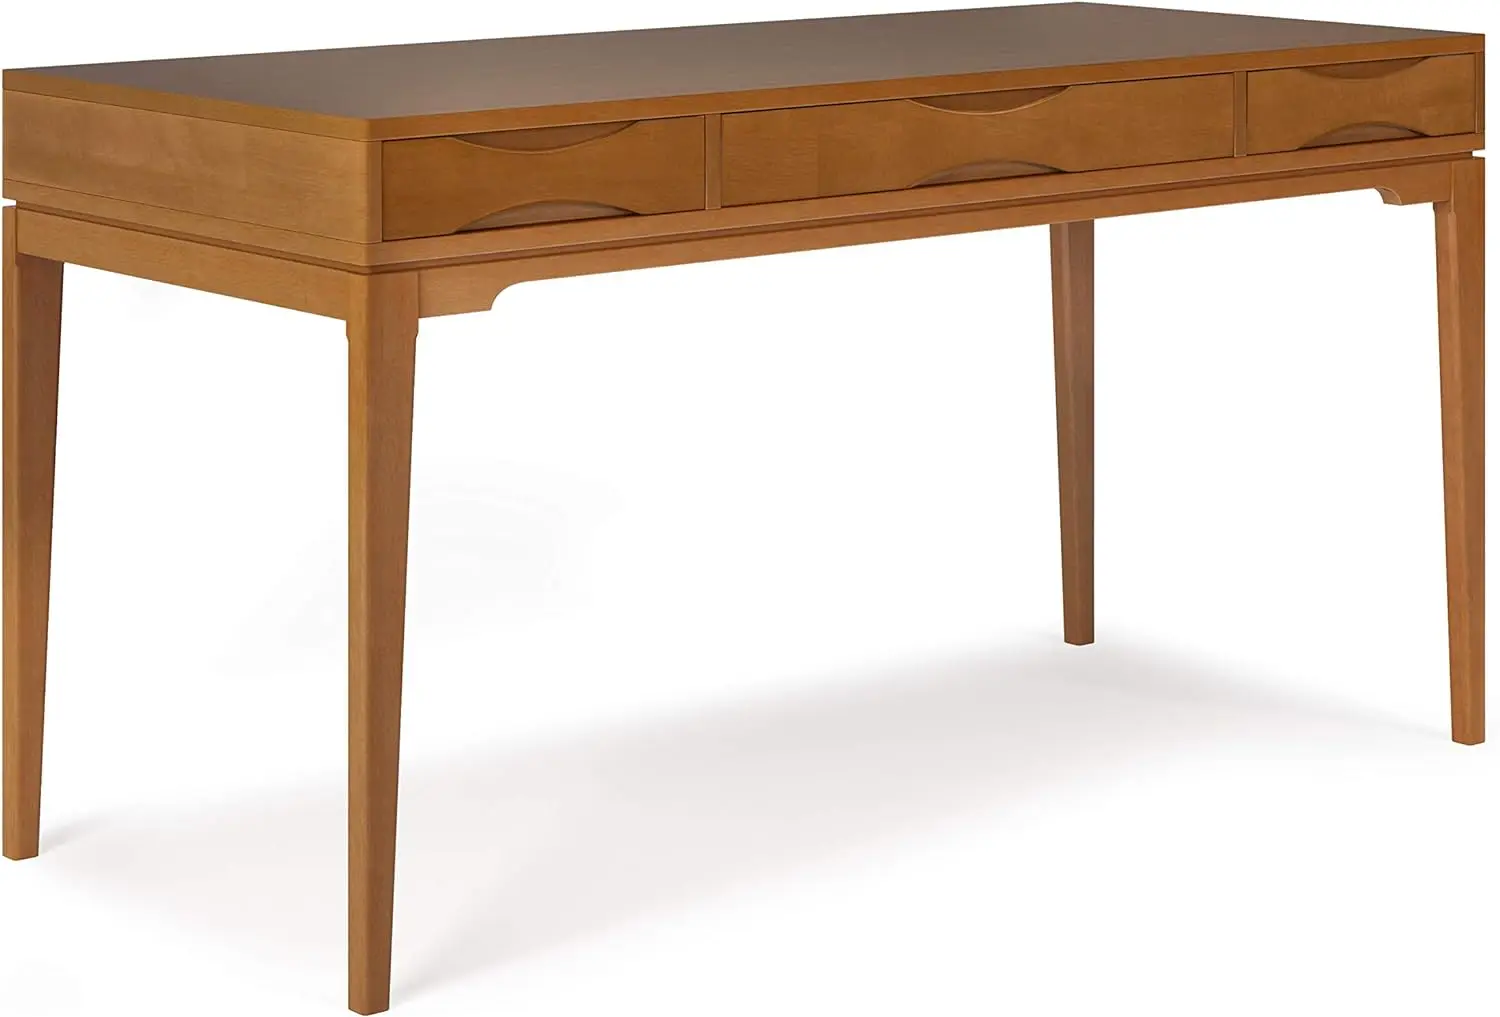 

SIMPLIHOME Harper SOLID WOOD Mid Century Modern 60 inch Wide Home Office Desk, Writing Table, Workstation